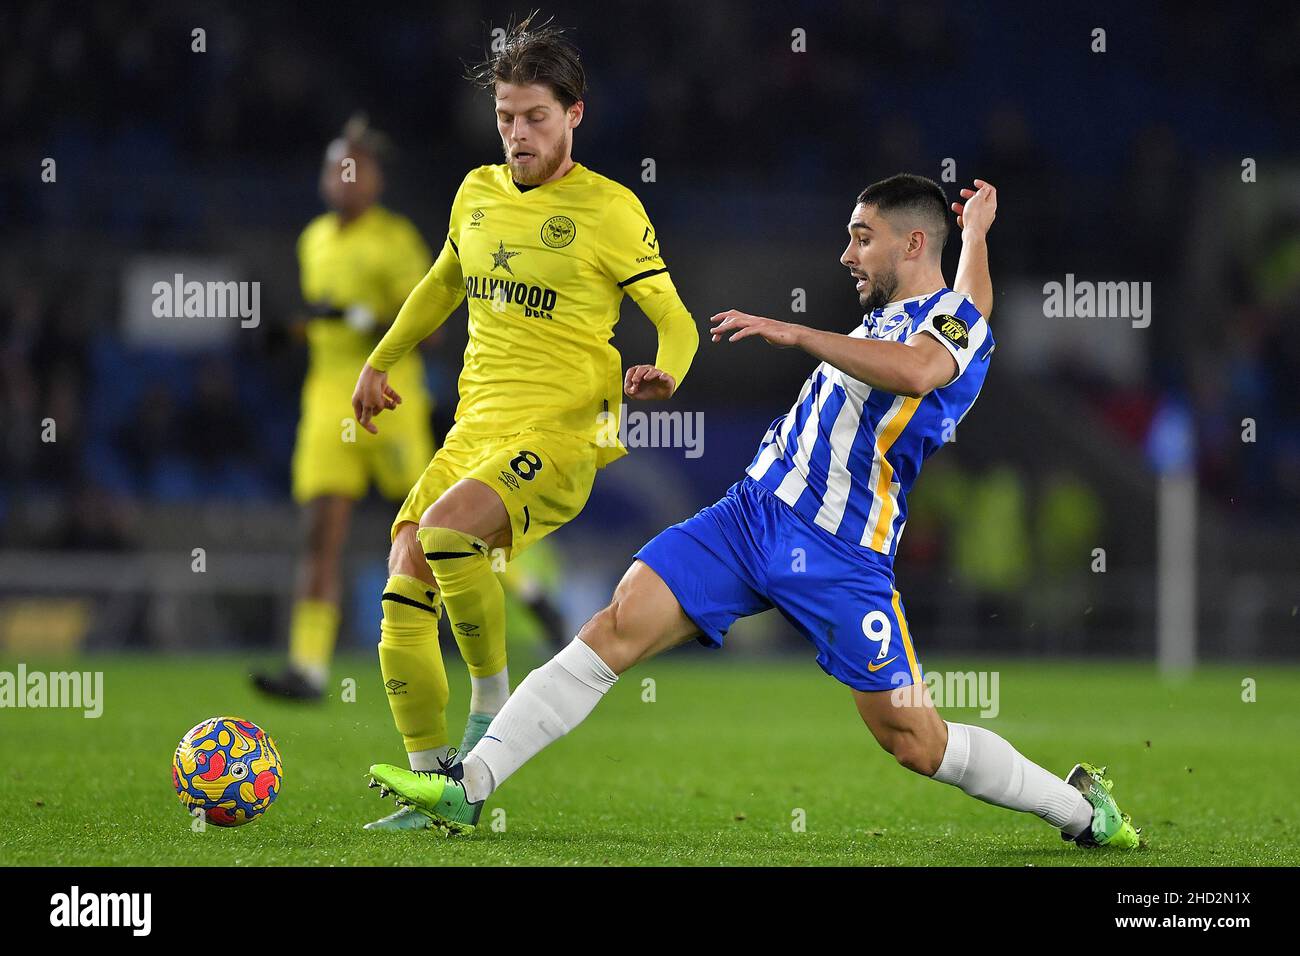 Neal Maupay of Brighton & Hove Albion and Mathias Jensen of Brentford - Brighton & Hove Albion v Brentford, Premier League, Amex Stadium, Brighton, UK - 26th December 2021  Editorial Use Only - DataCo restrictions apply Stock Photo